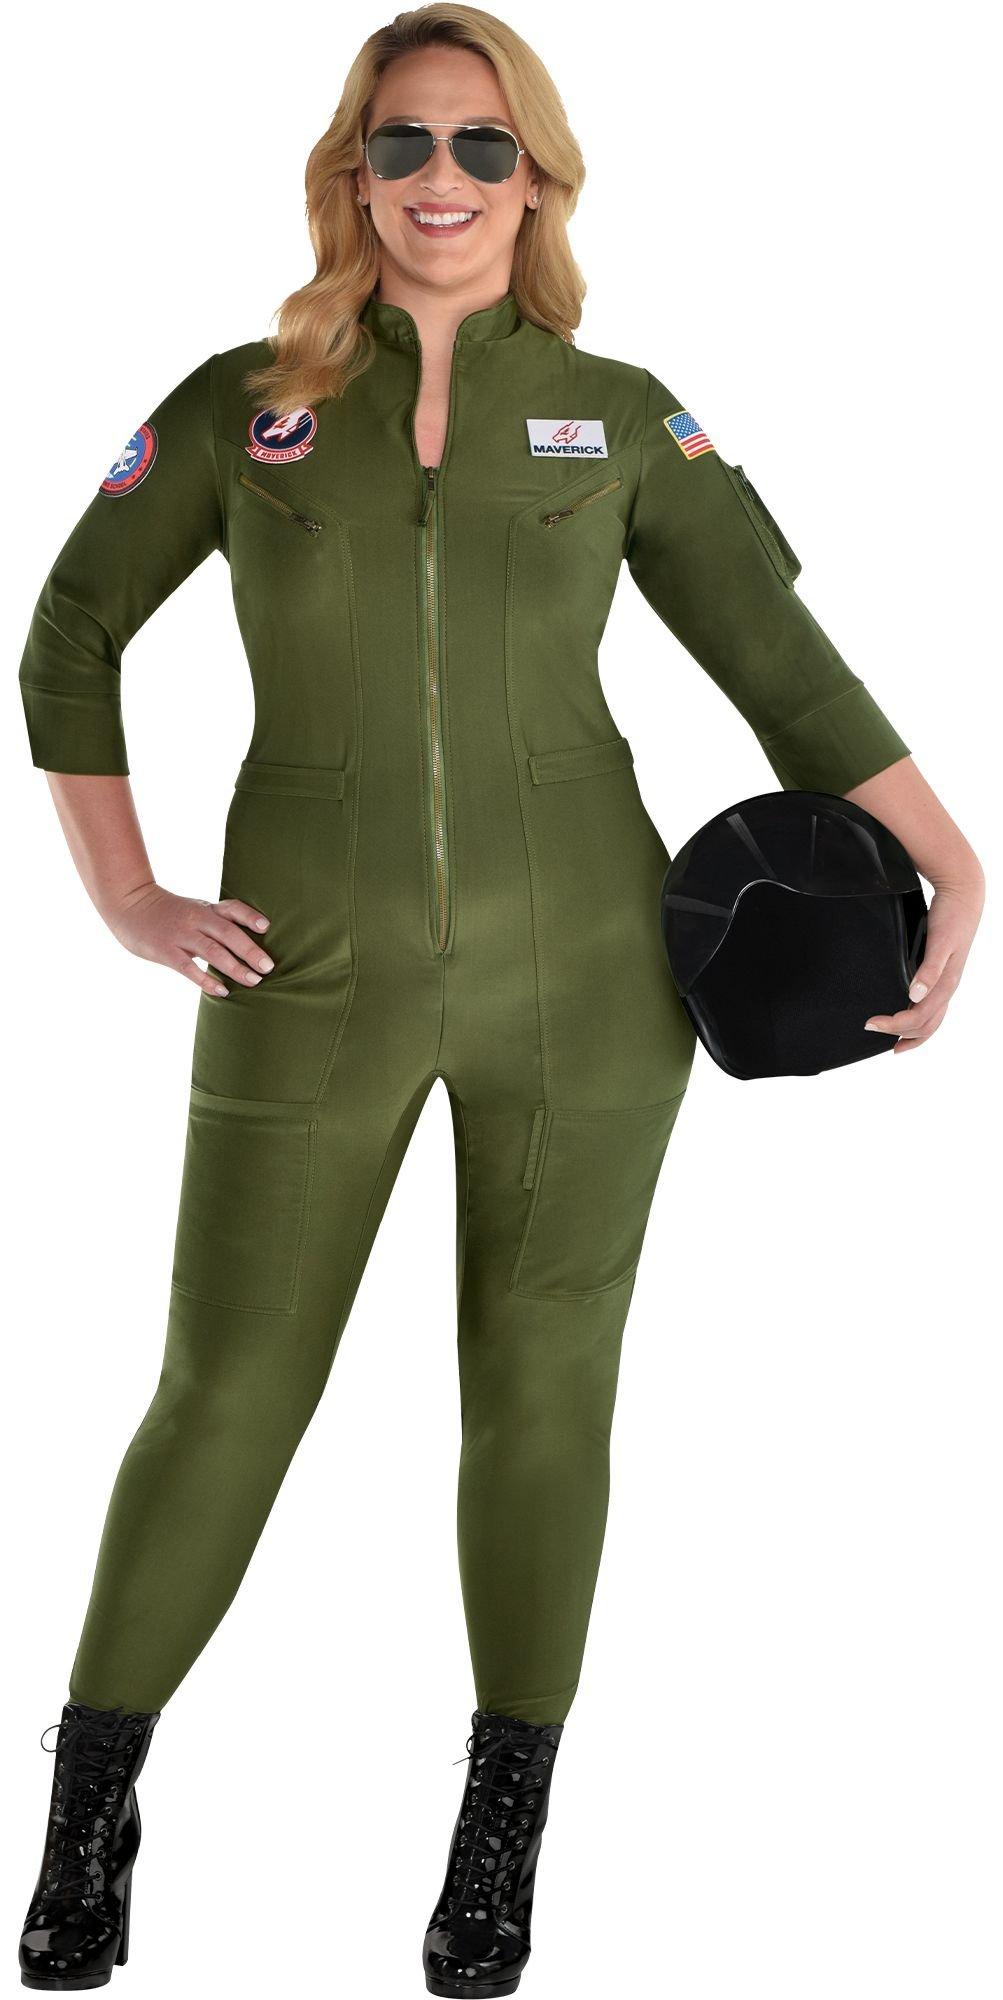 Army, Navy, Air Force, Military, & Swat Costumes | Party City